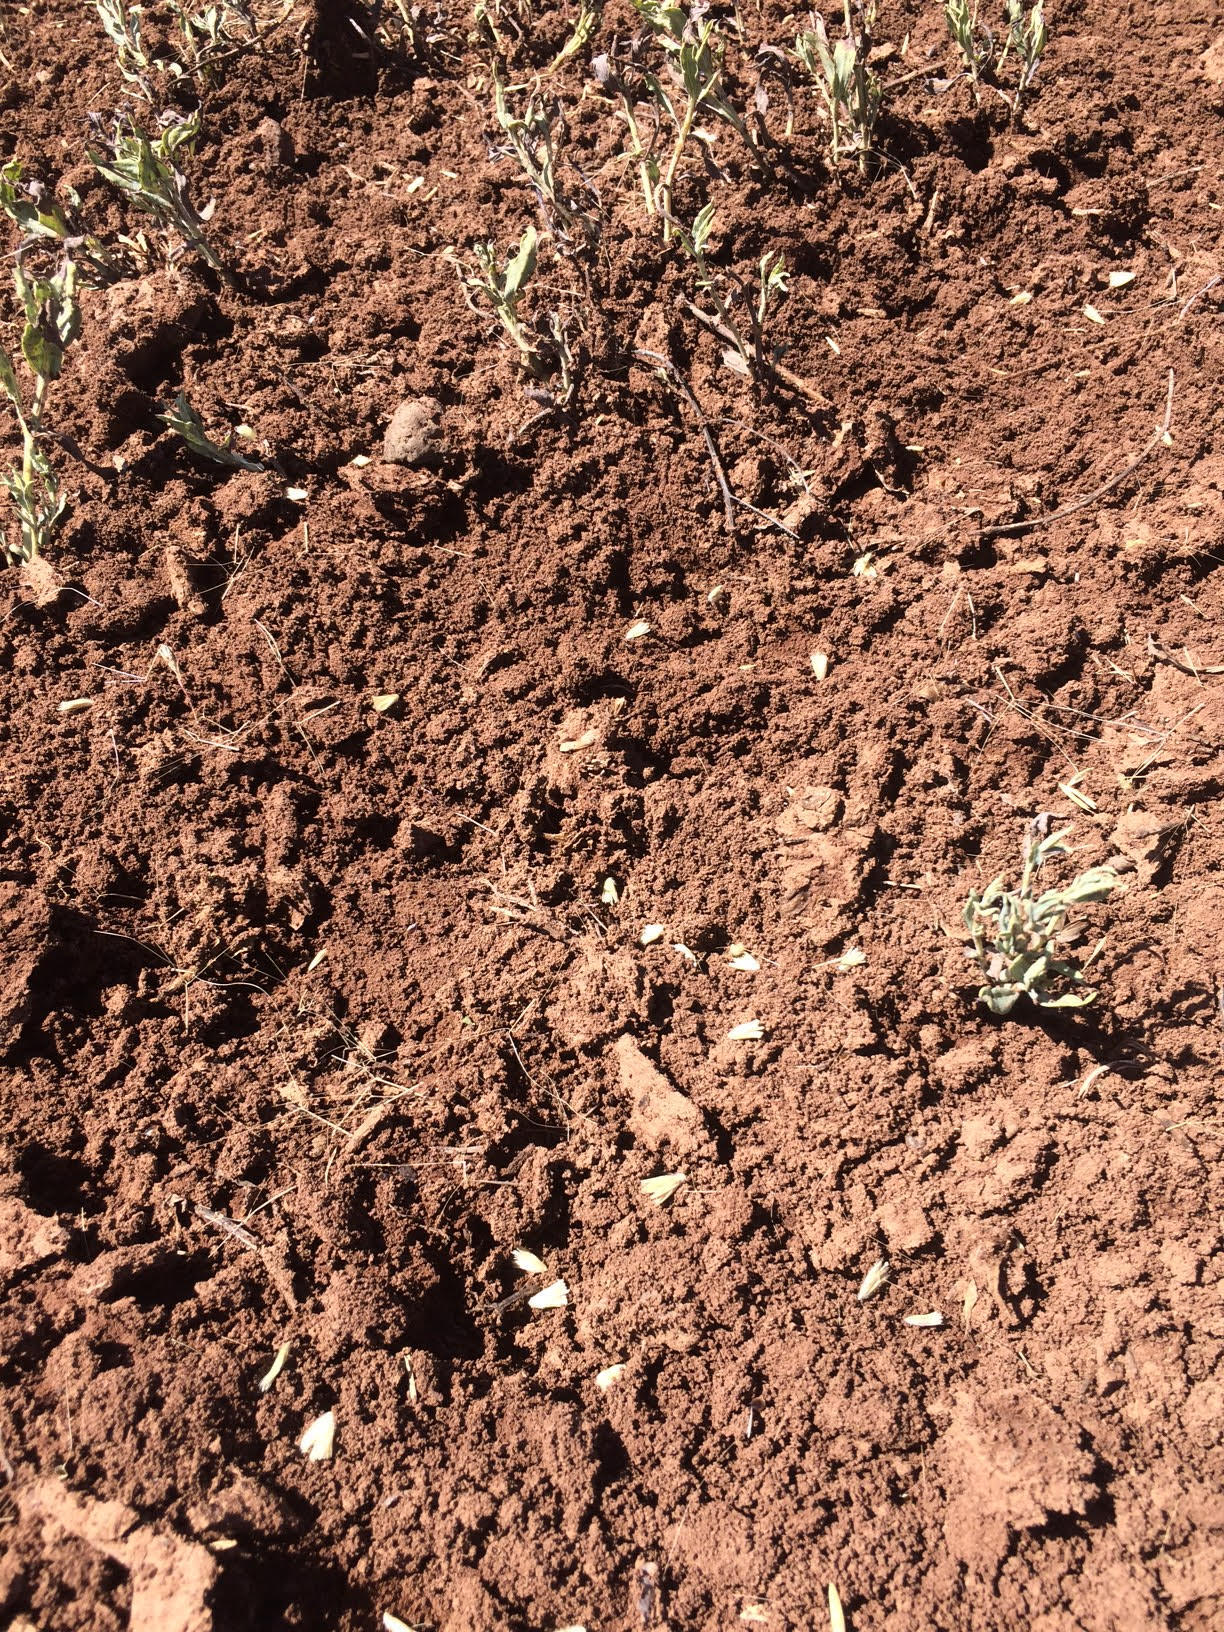 Close-up of disturbed soil containing few plants with recently spread native plant seeds at soil surface.